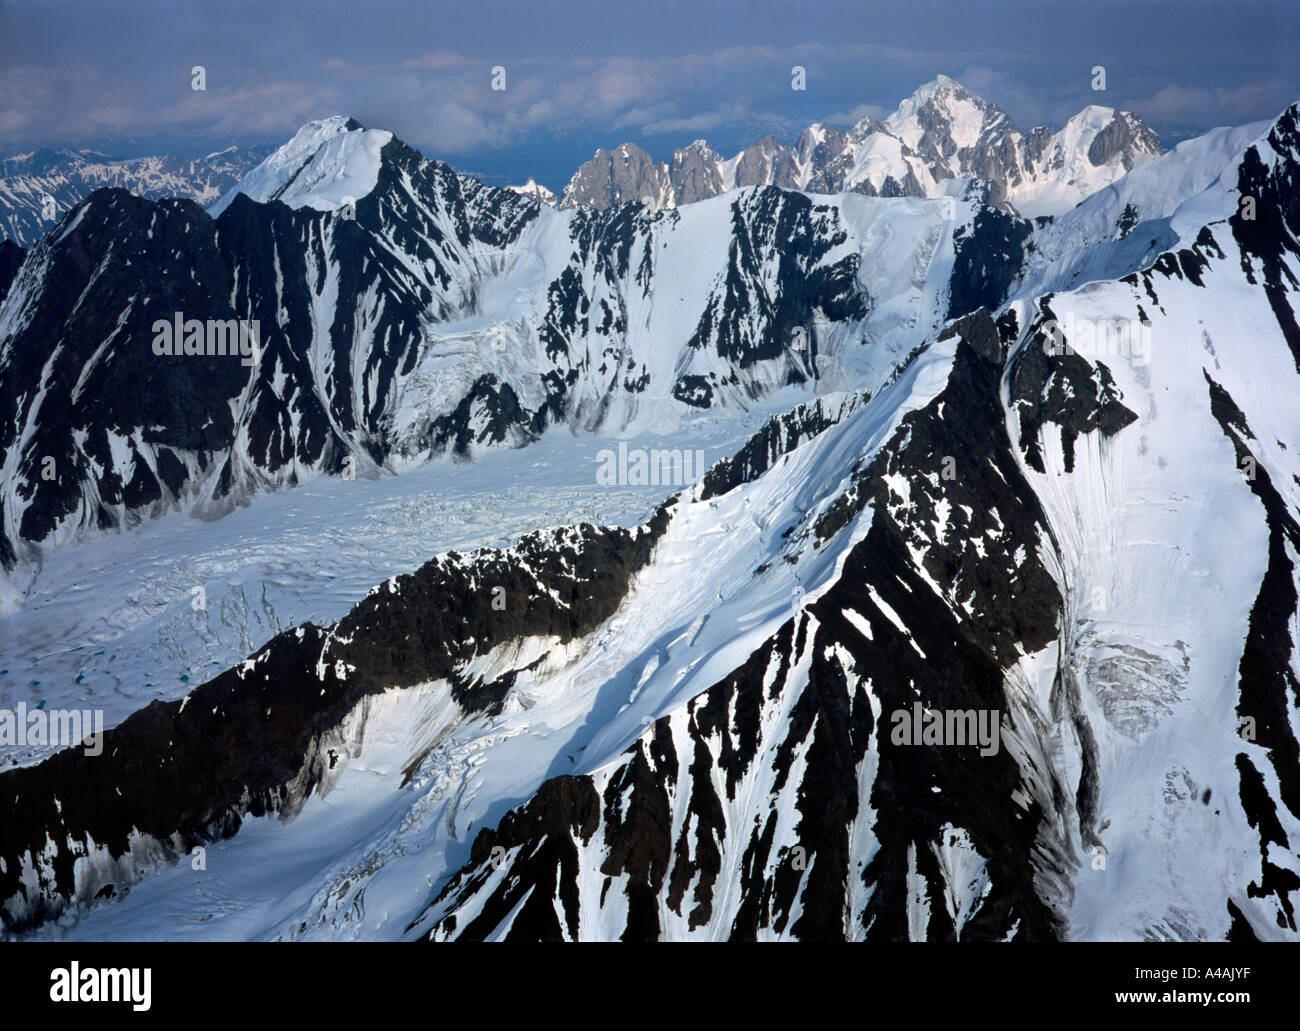 Glaciers flow out of the mountains of Denali National Park, Alaska Stock Photo